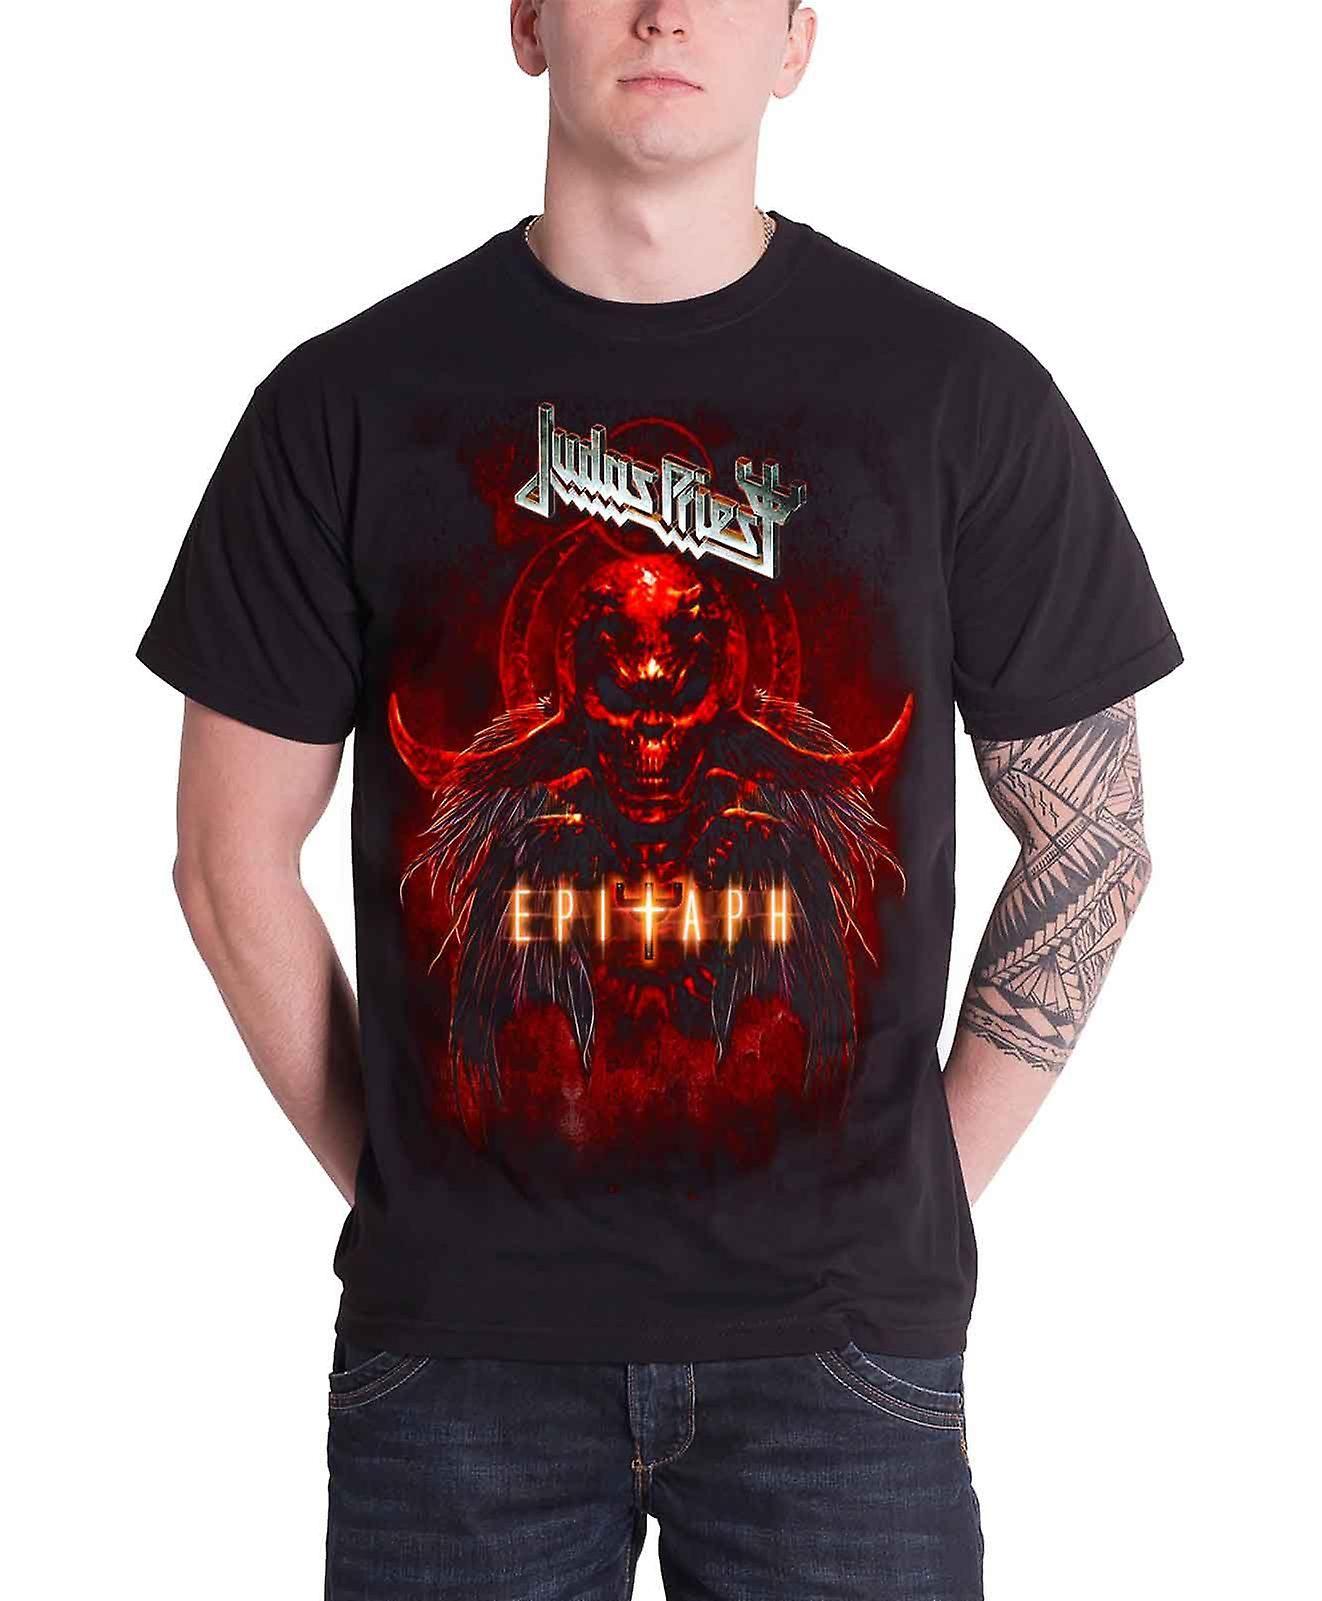 Black and Red Band Logo - Judas Priest Mens T Shirt Black Epitaph Red Horns band logo Official ...